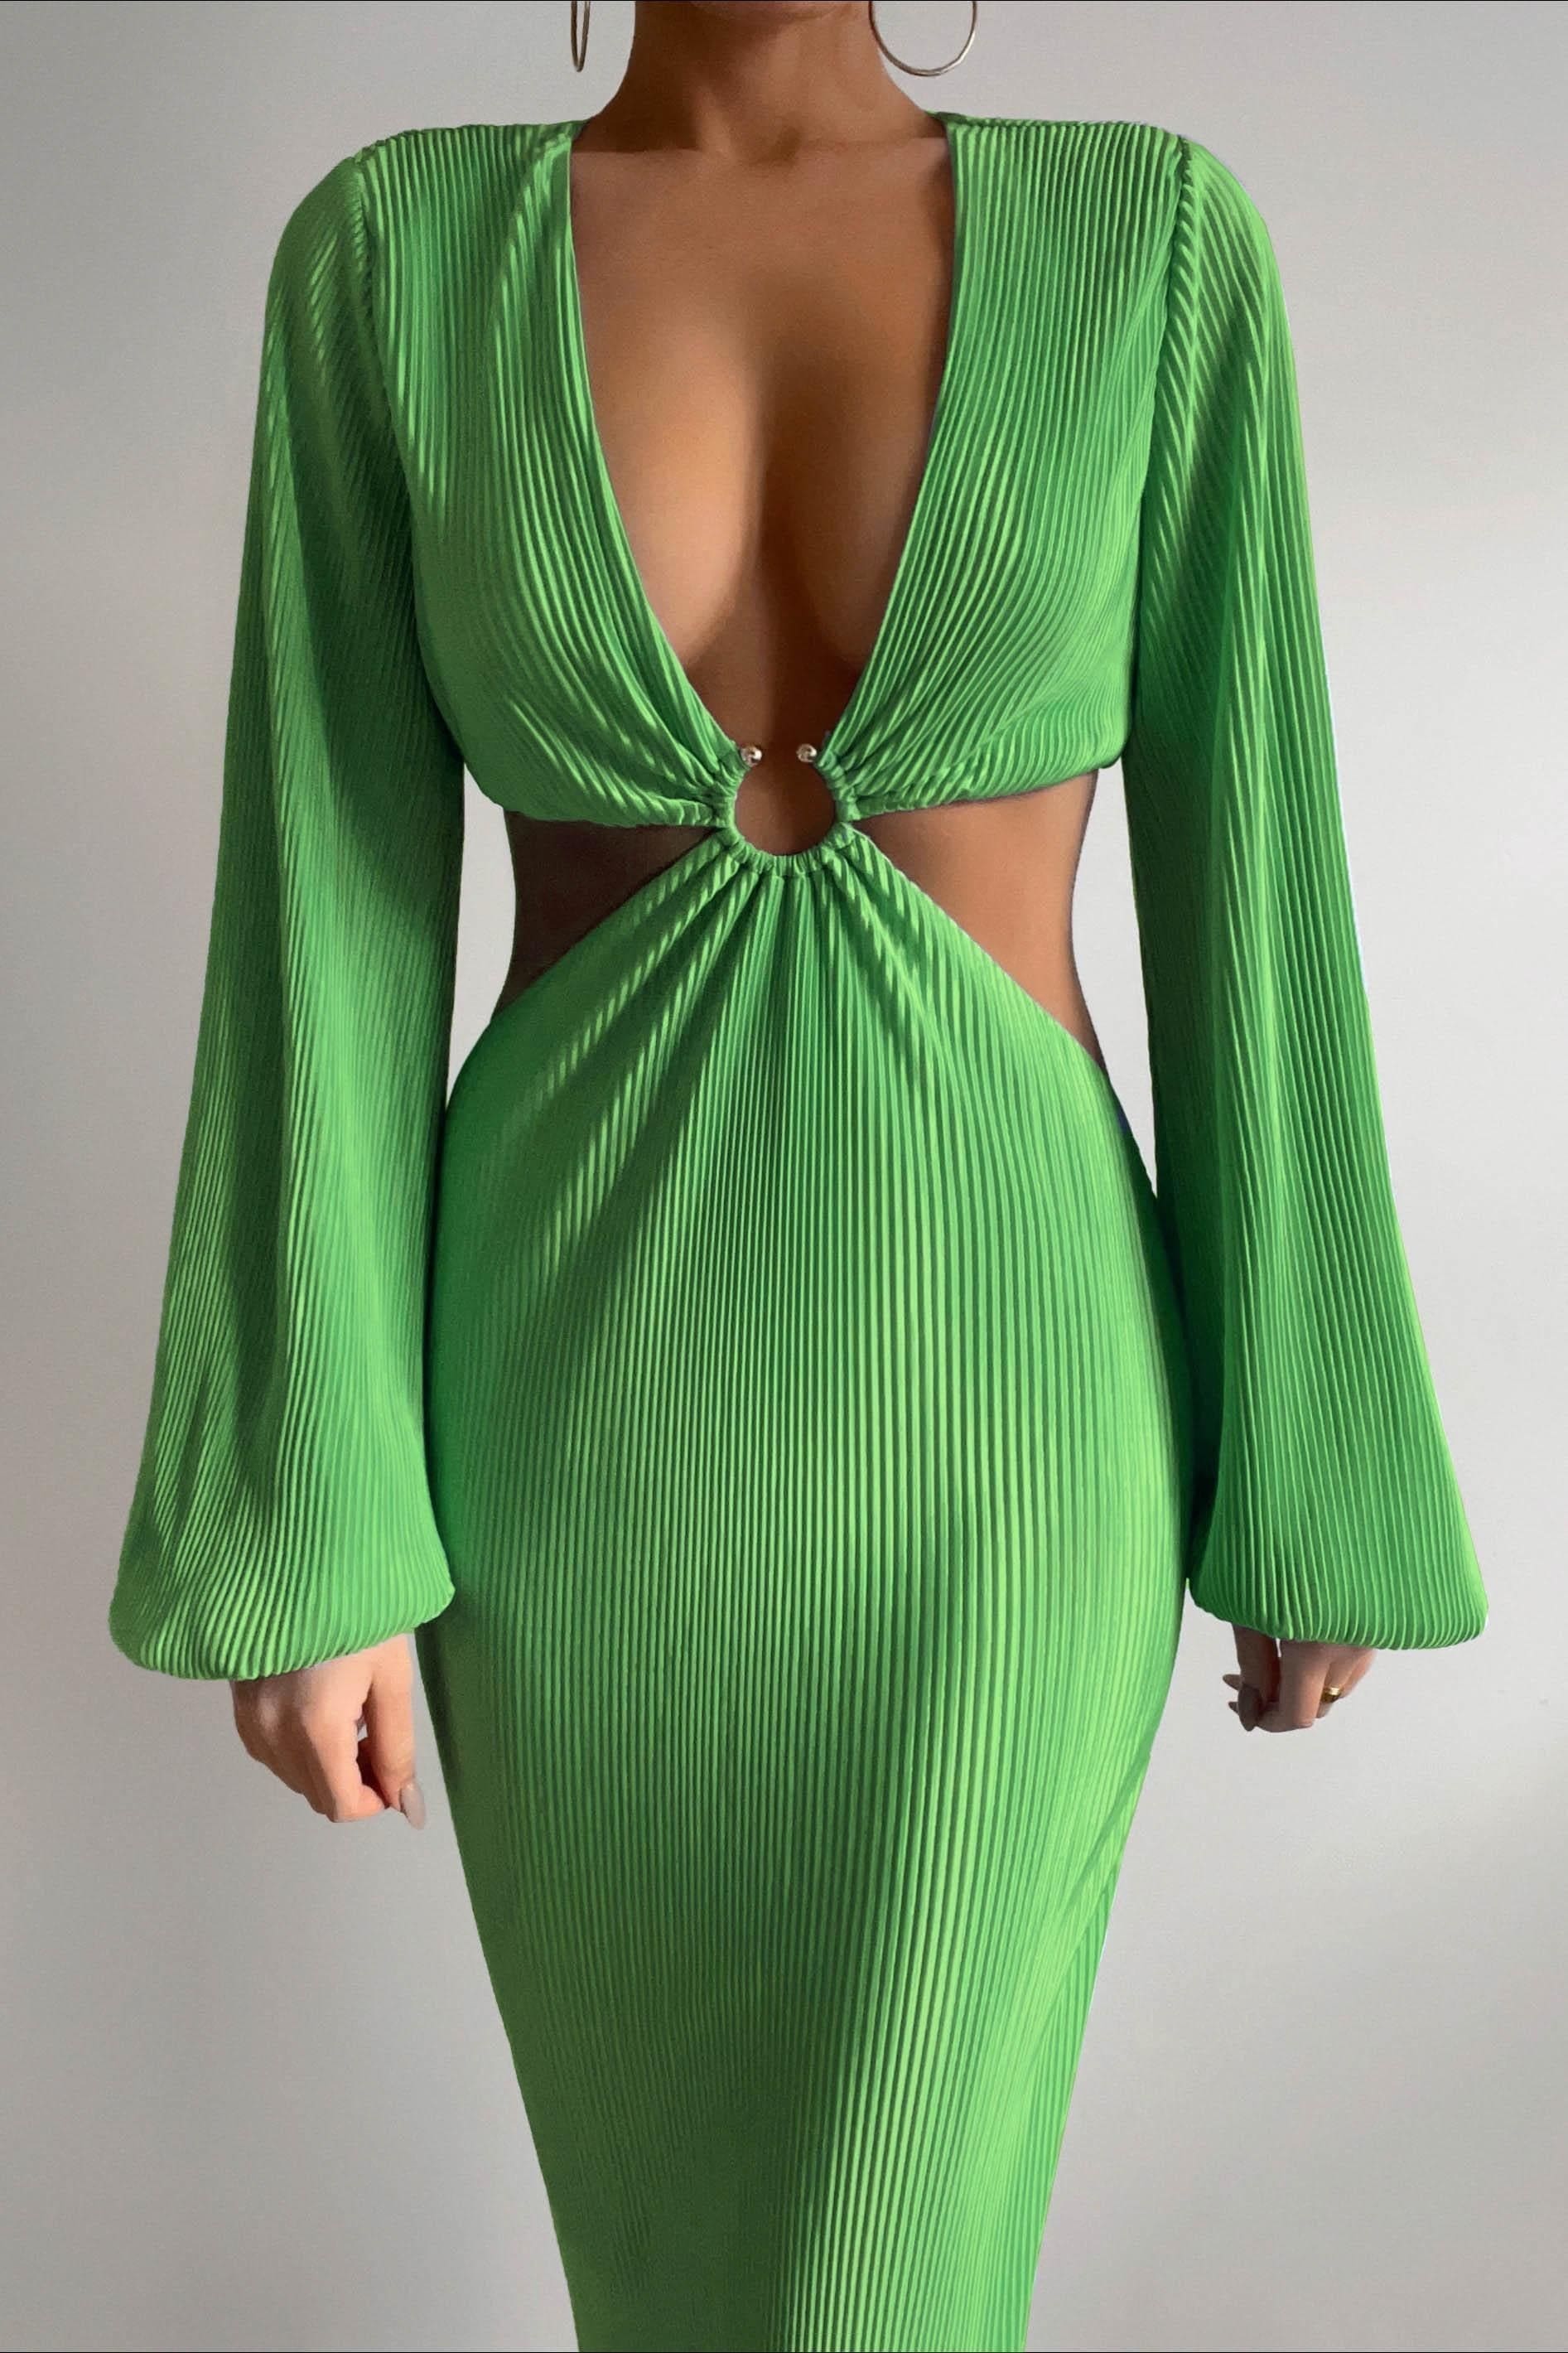 Faith Dress, BALLOON SLEEVE, CUT OUT, DRESS, DRESSES, GREEN, LONG SLEEVE, MAXI SKIRT, MIDI DRESS, NEW ARRIVALS, POLYESTER, SPECIAL OCCASION, Faith Dress only $130.00 @ MISHKAH ONLINE FASHION BOUTIQUE, Shop The Latest Women's Dresses - Our New Faith Dress is only $130.00, @ MISHKAH ONLINE FASHION BOUTIQUE-MISHKAH